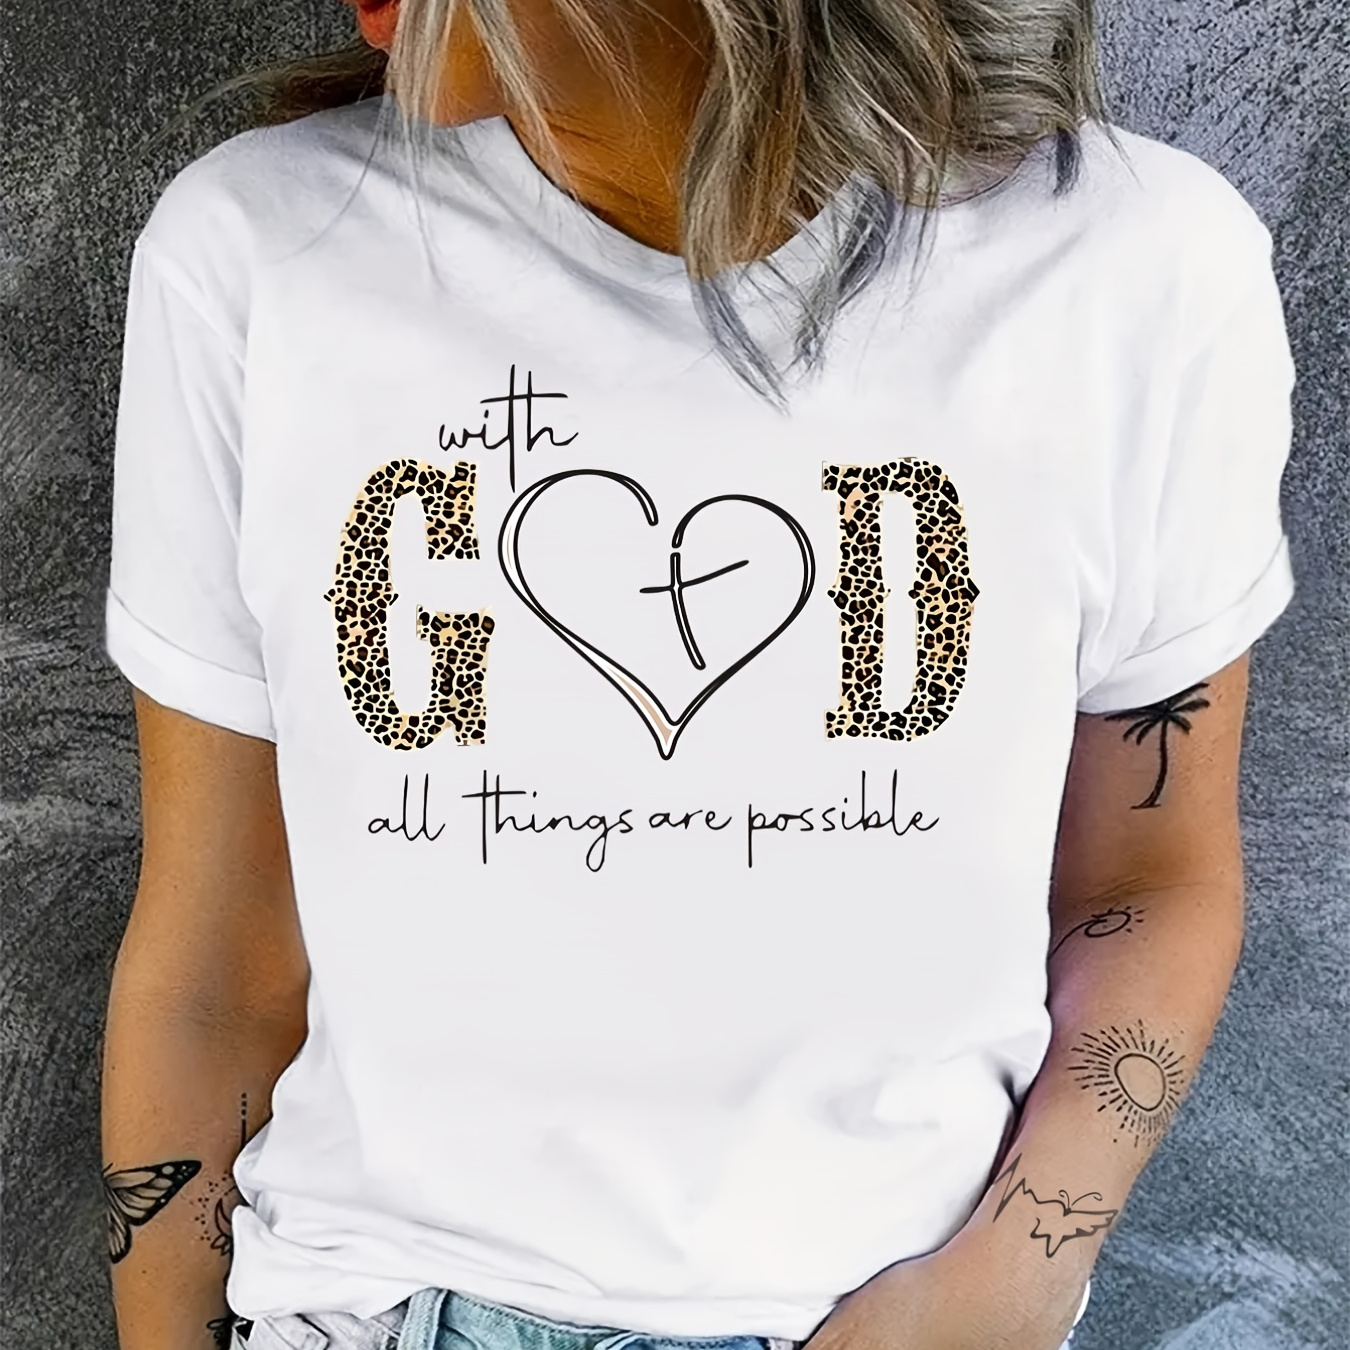 

With God Print T-shirt, Summer Short Sleeve Crew Neck Casual Top, Women's Clothing